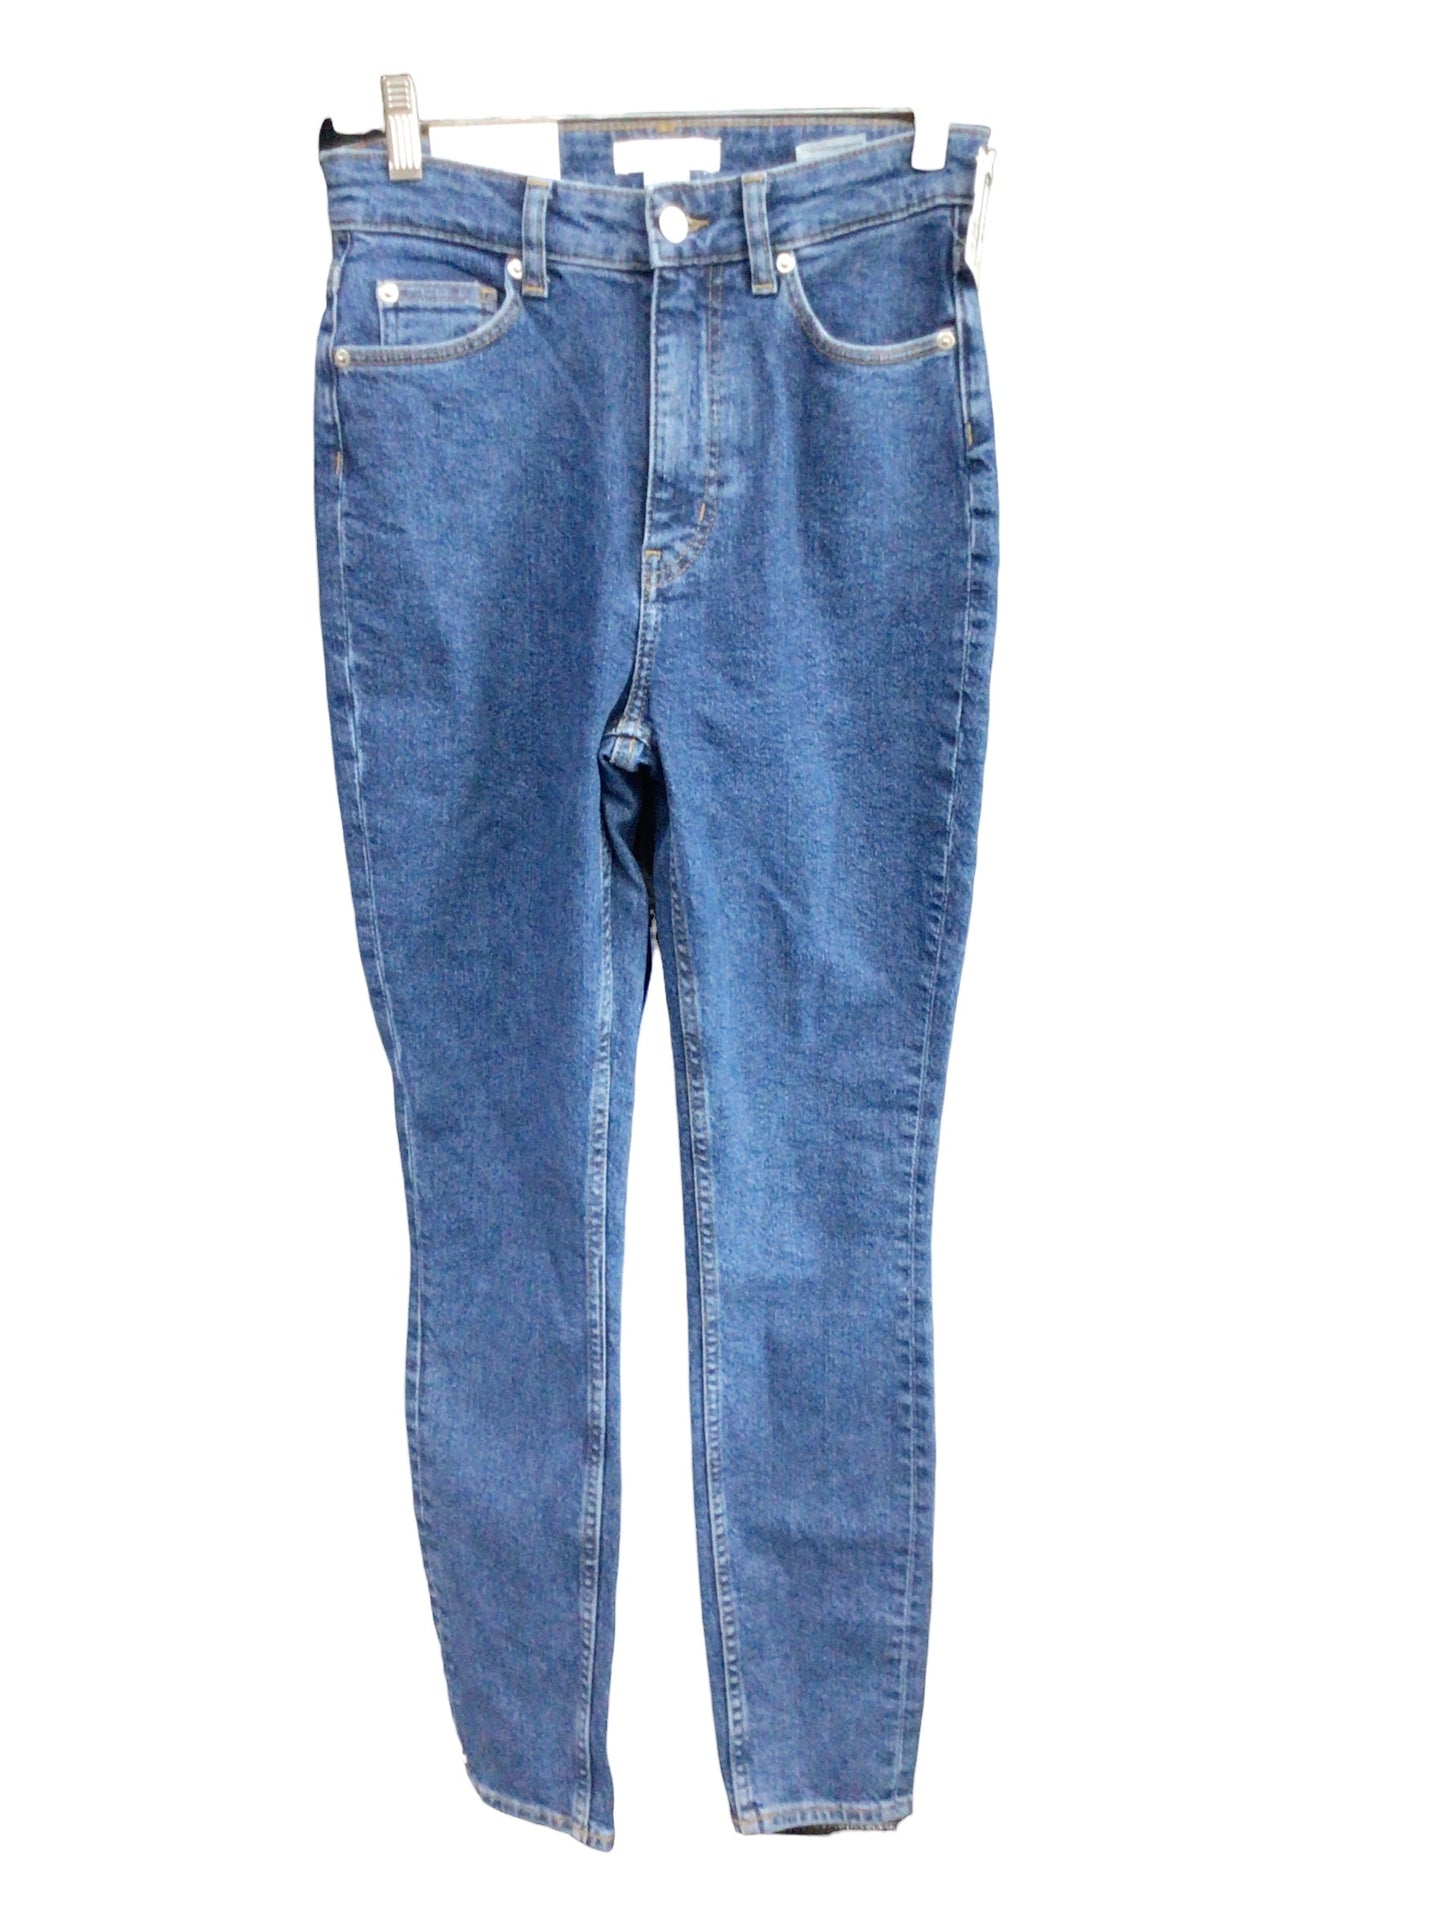 Jeans Skinny By H&m  Size: 6